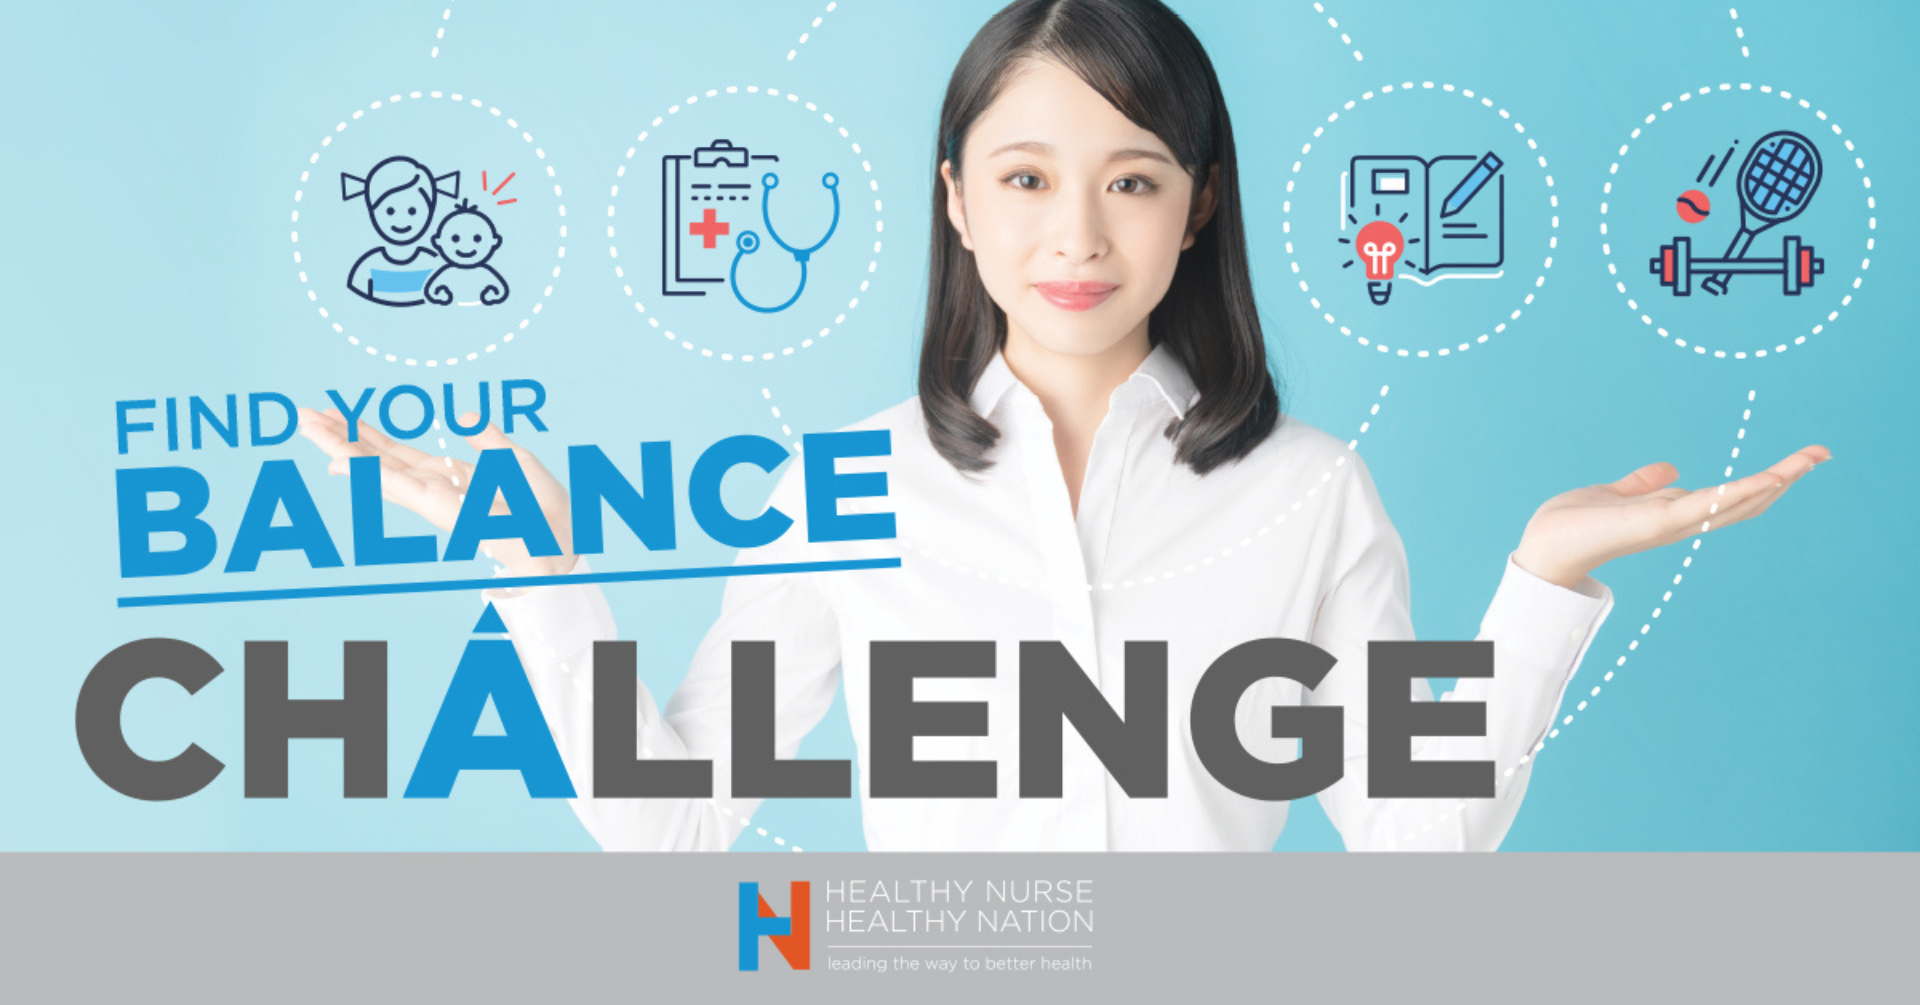 Claim Your “Me” Time - Healthy Nurse, Healthy Nation - Find Your Balance challenge - Day 6 4646